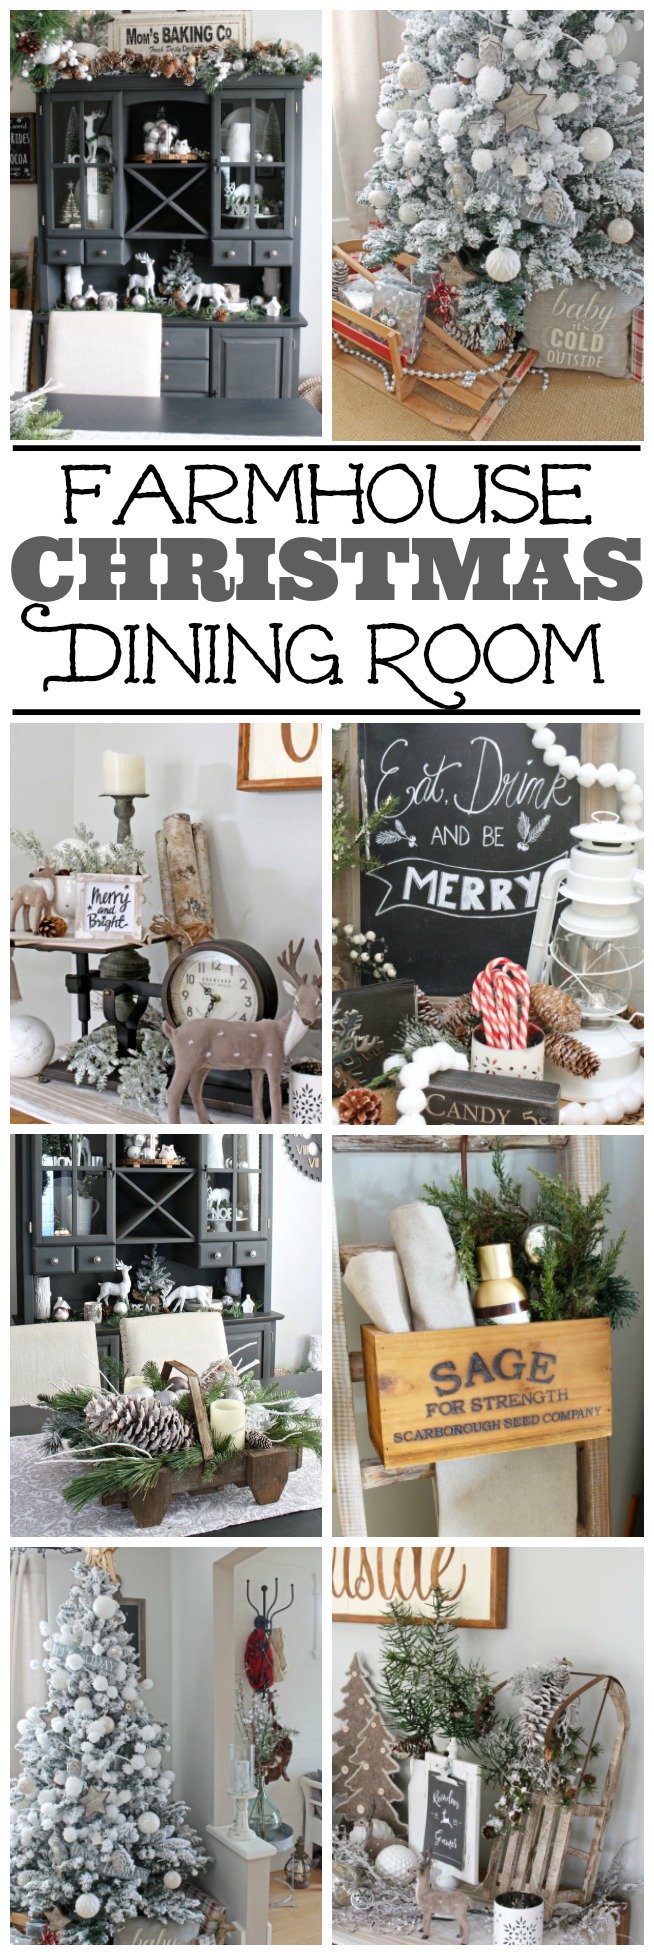 Beautiful neutral Christmas dining room with a farmhouse feeling. Lots of Christmas decorating ideas to add that soft, winter's touch.